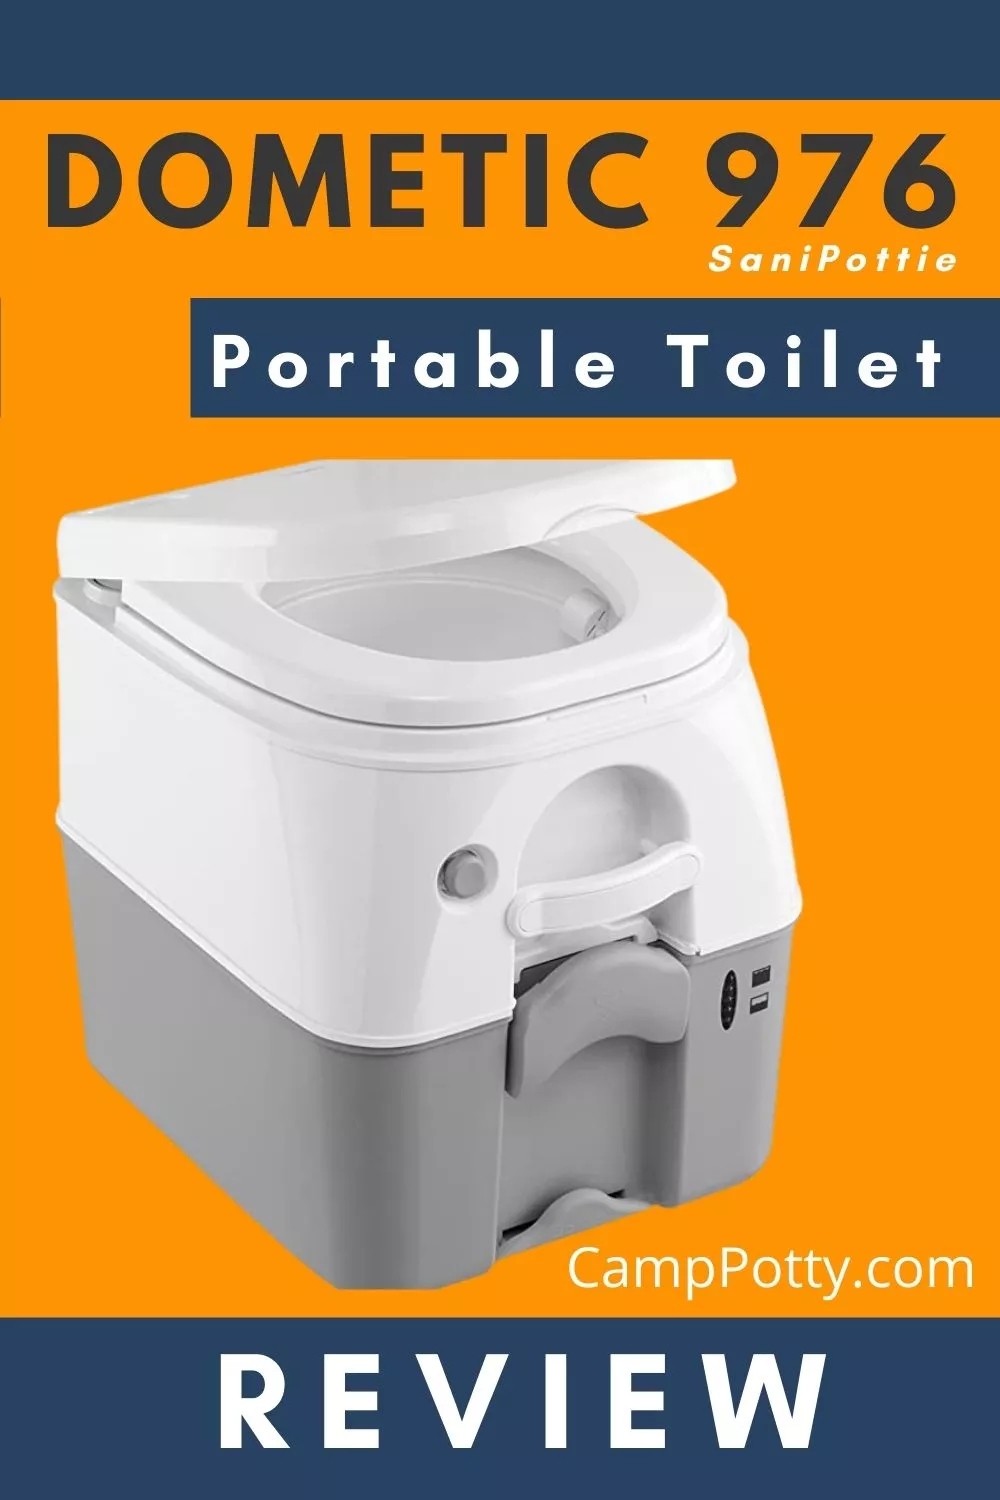 An in-depth review of the DOMETIC SaniPottie Portable Toilet. pros and cons of the product, how it is used and who is it for.